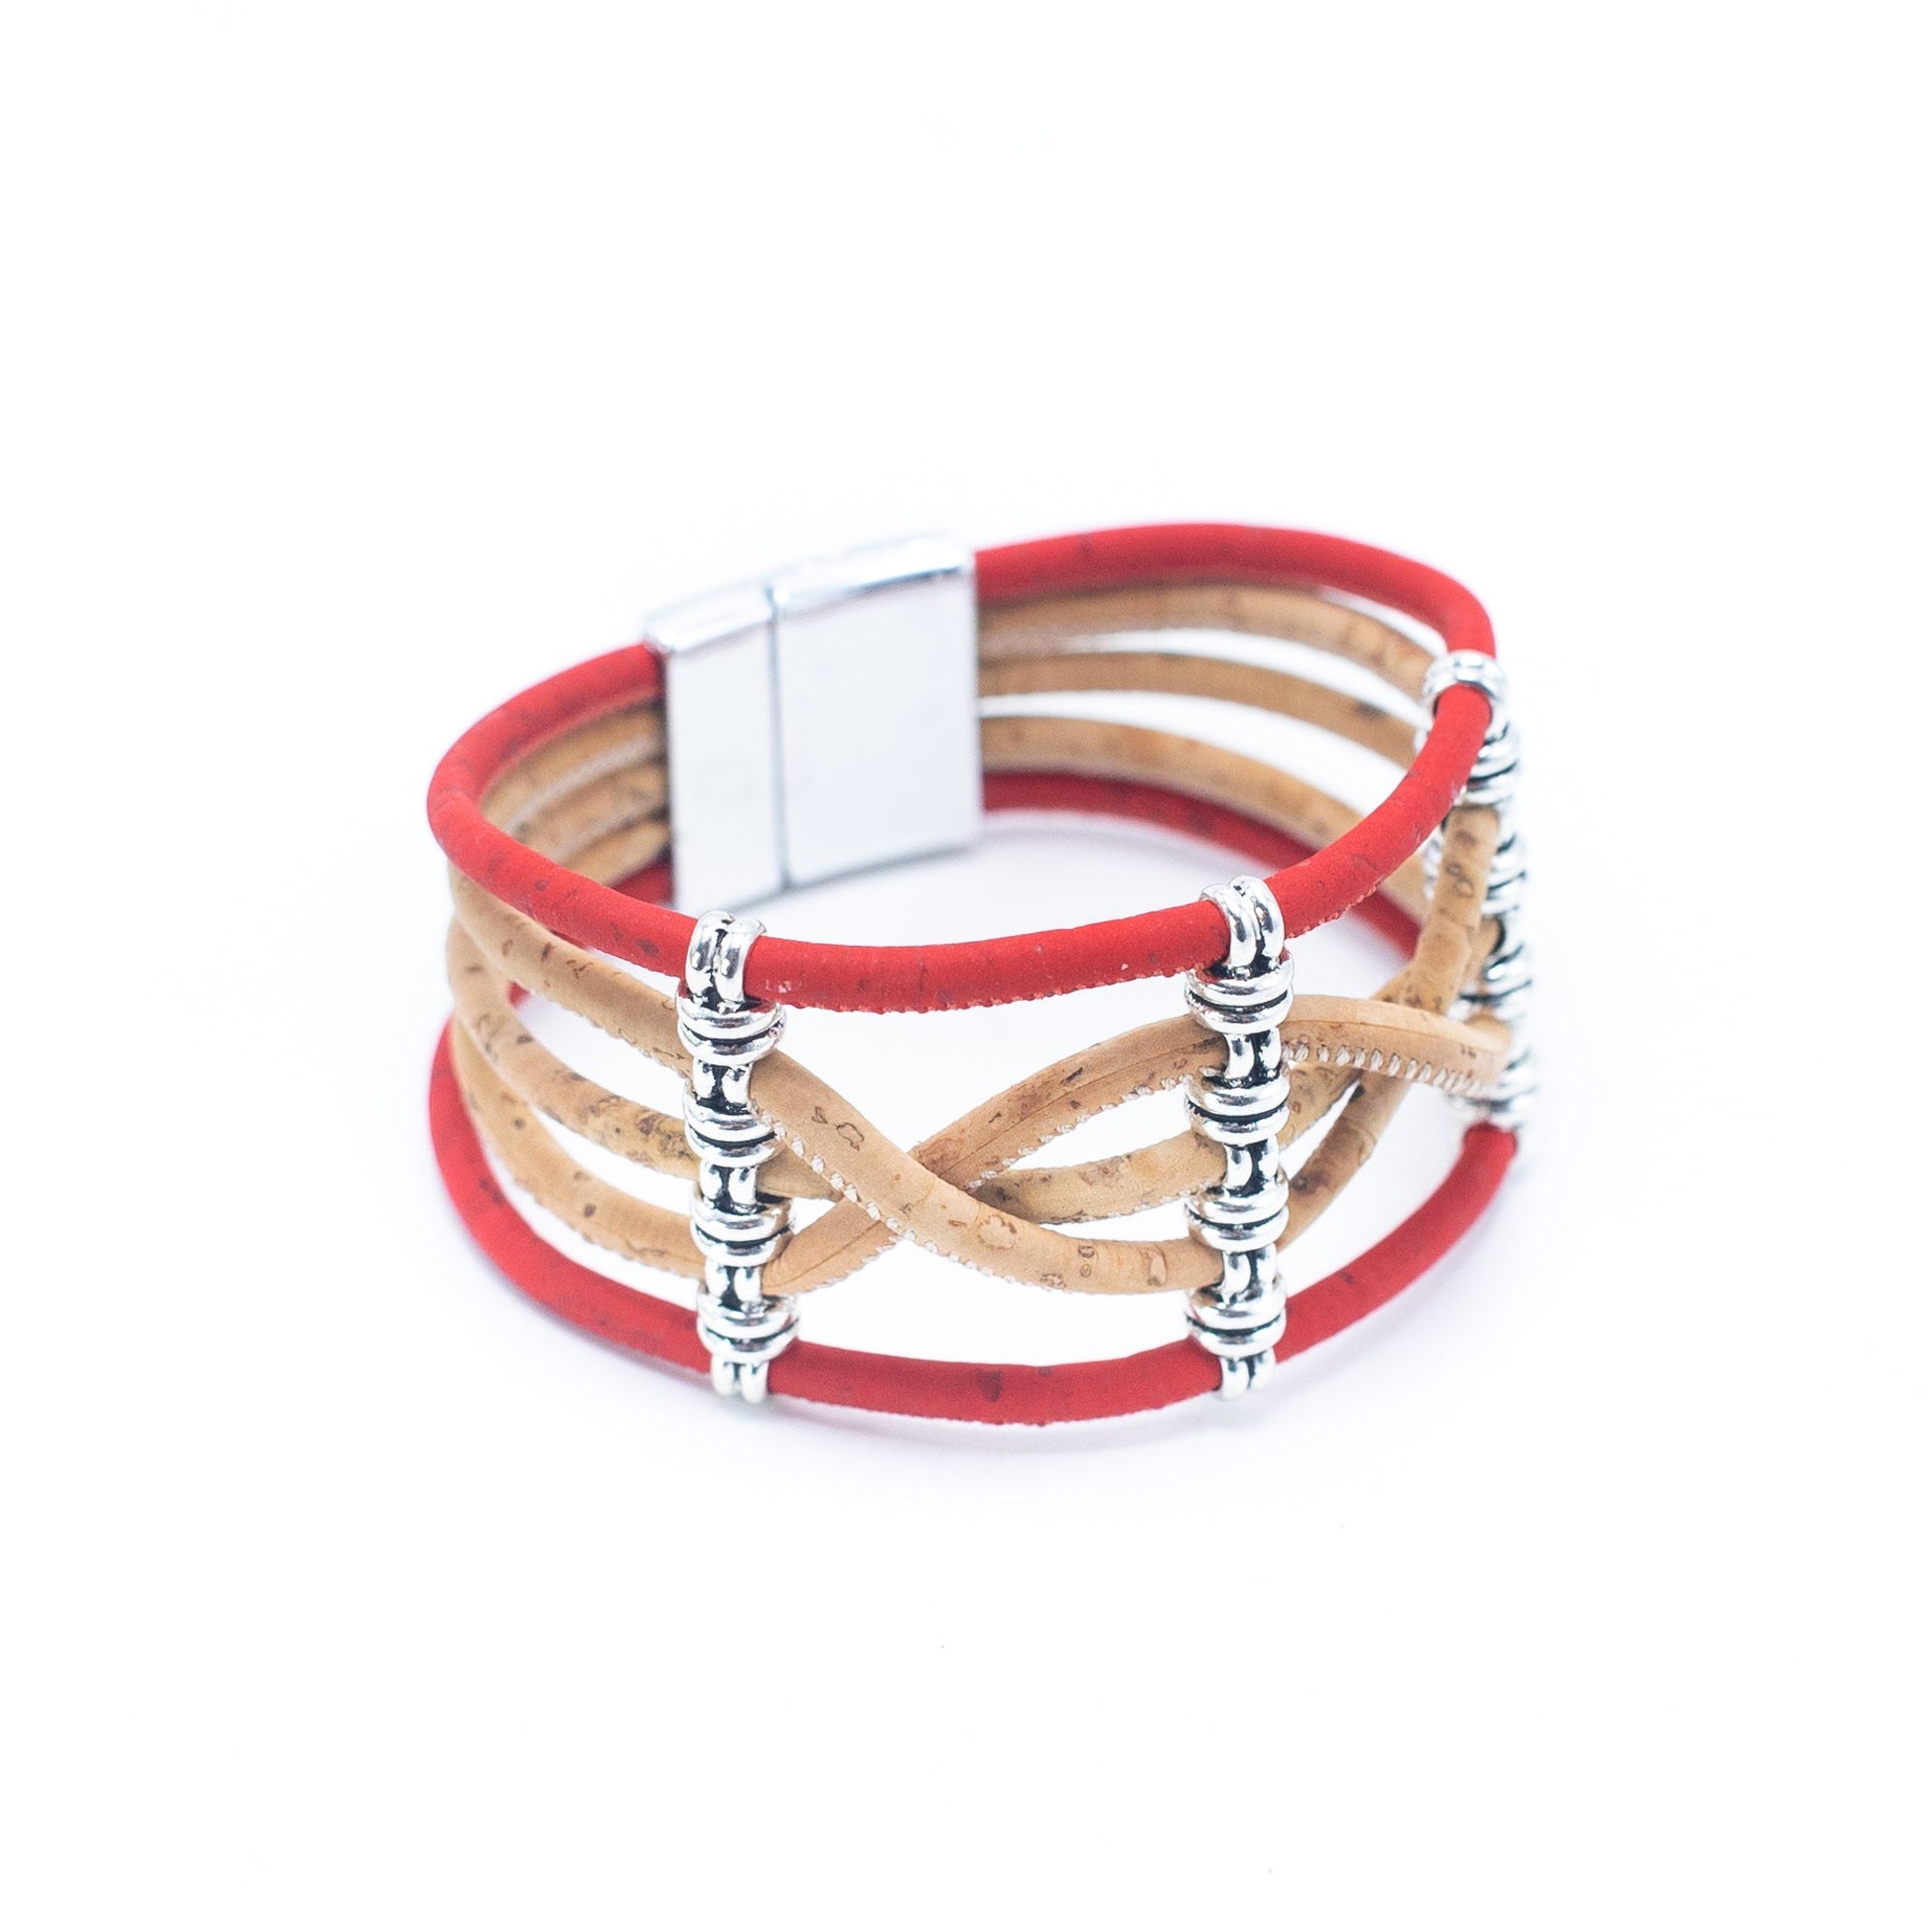 Colorful Cork Bracelet for Women | THE CORK COLLECTION